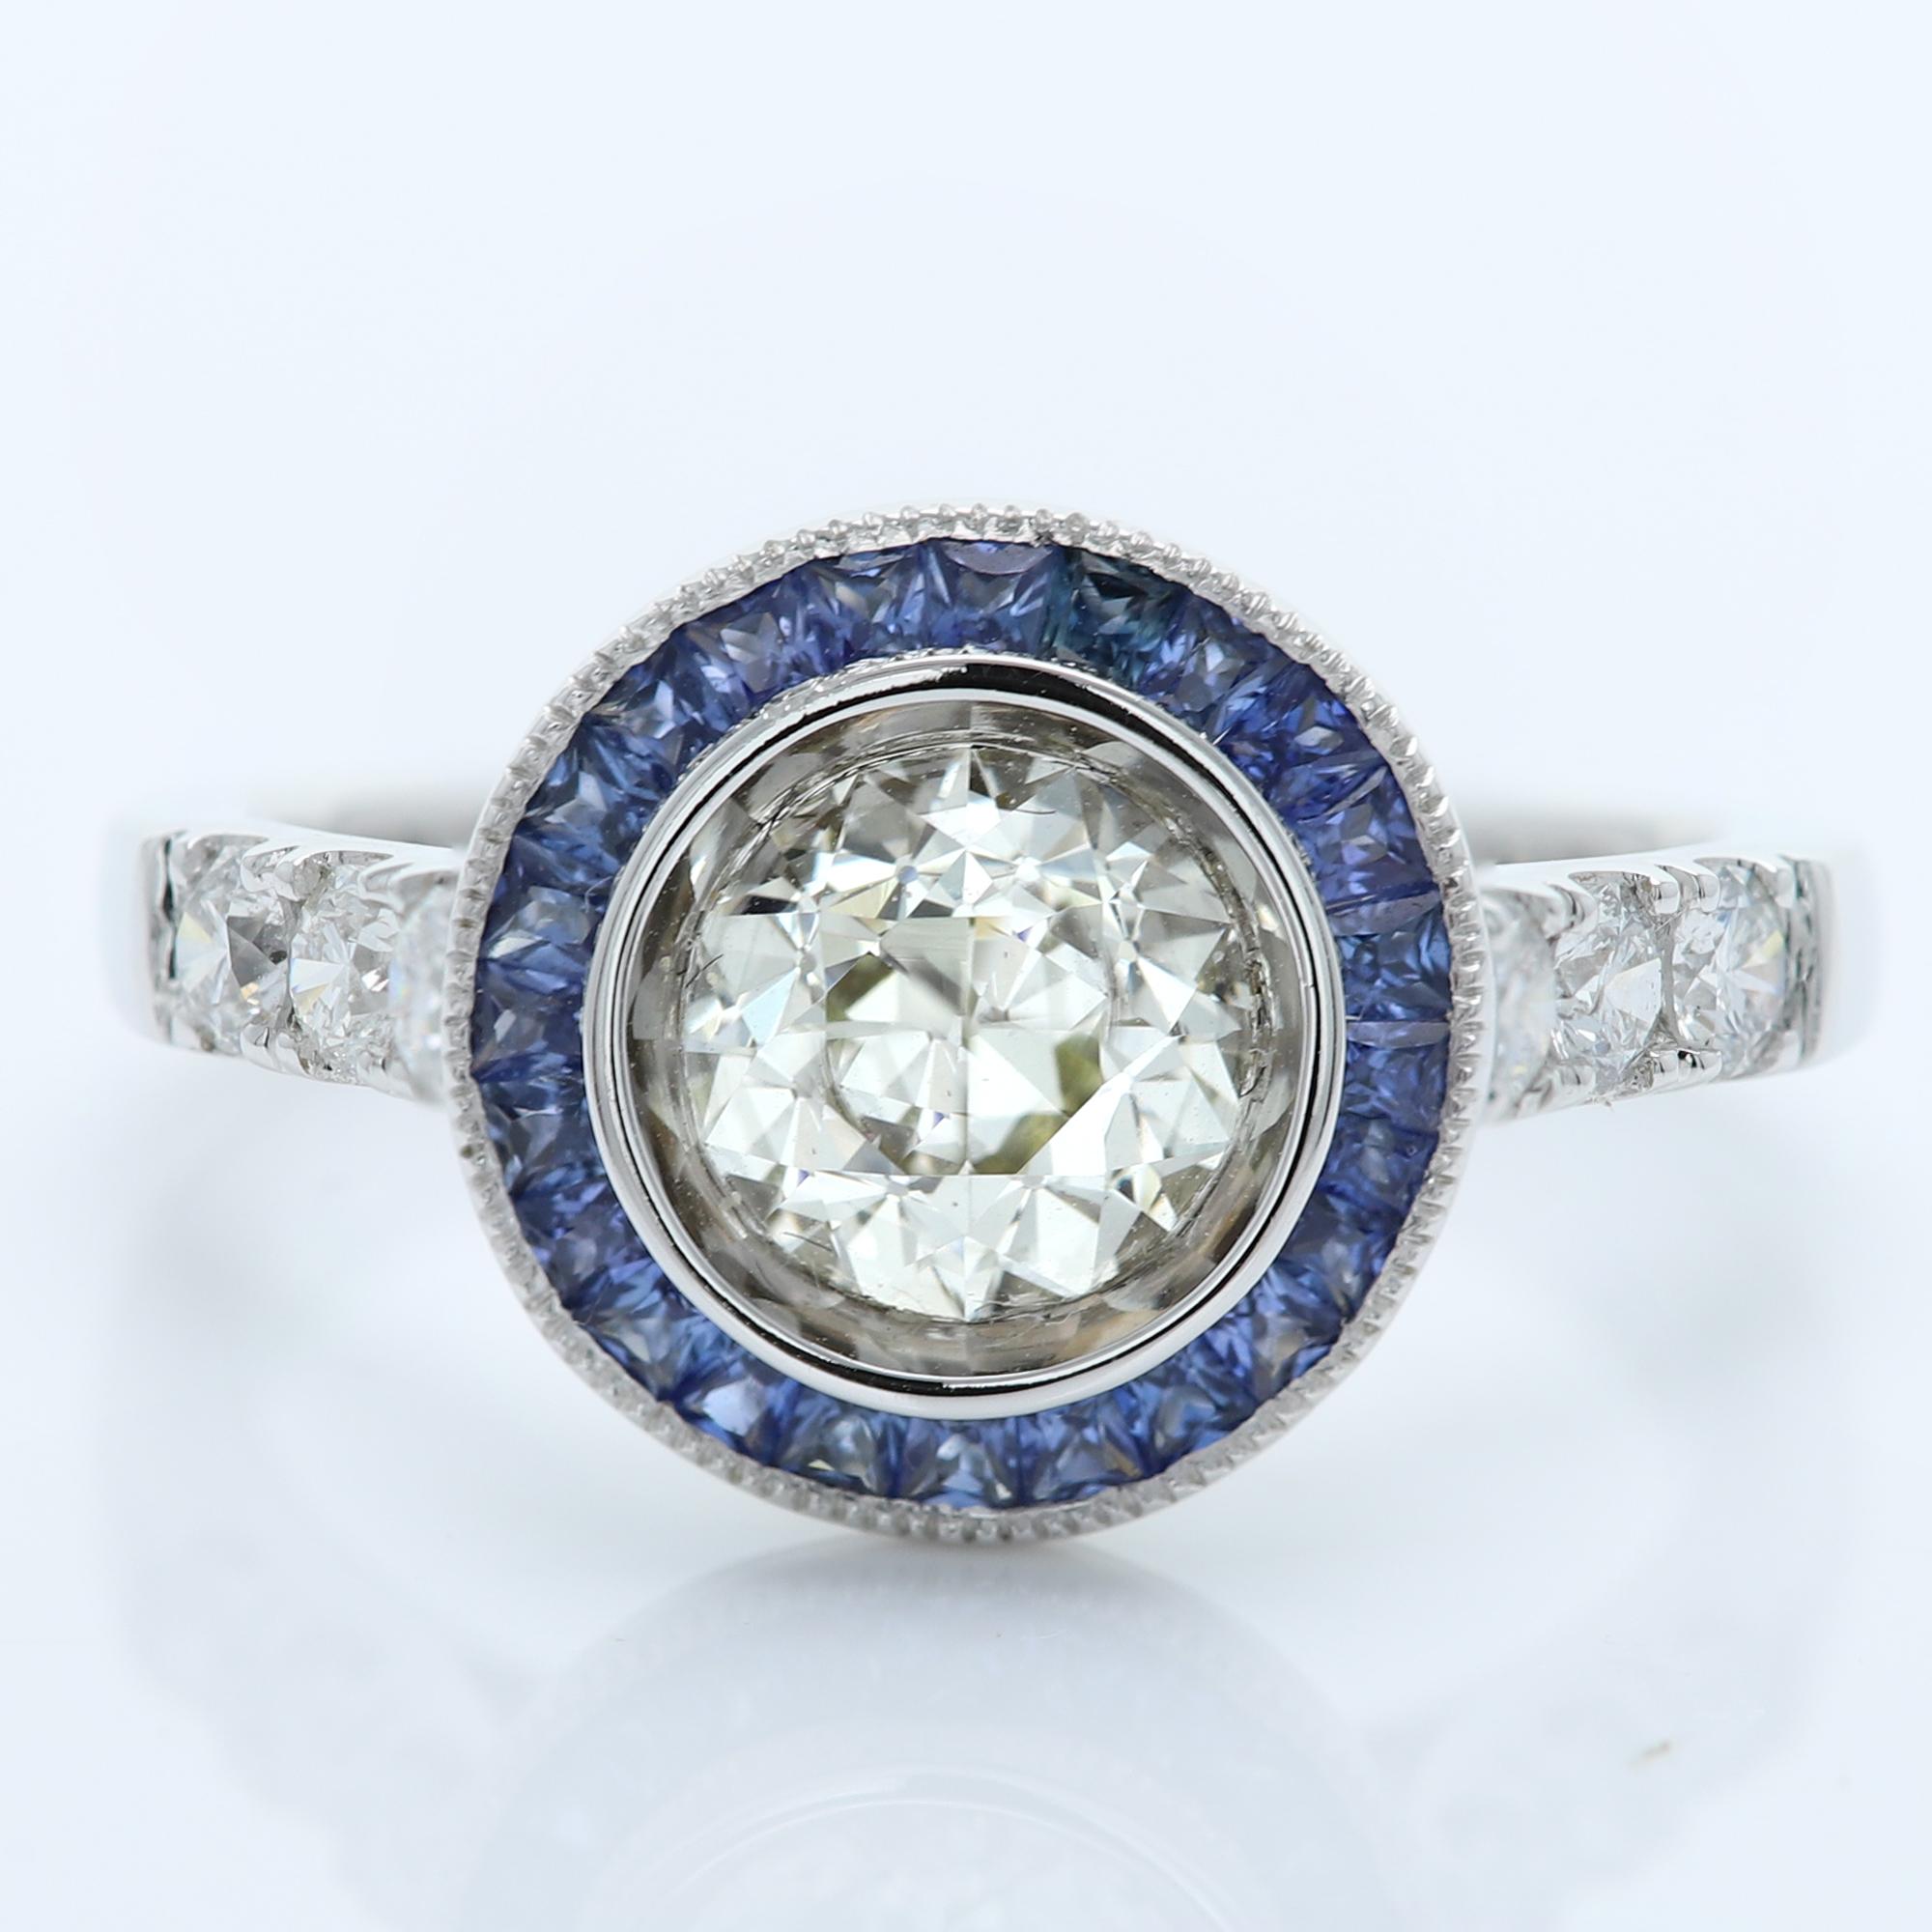 Art Deco Style Bold Ring
Center is 1.25 carat Diamond surrounded with Blue Sapphire, sides have regular small white Diamonds
All stones are Natural
18k White 5.70 grams
Center Diamond is a Brilliant J-K color and SI2-I1 clean however has a very good